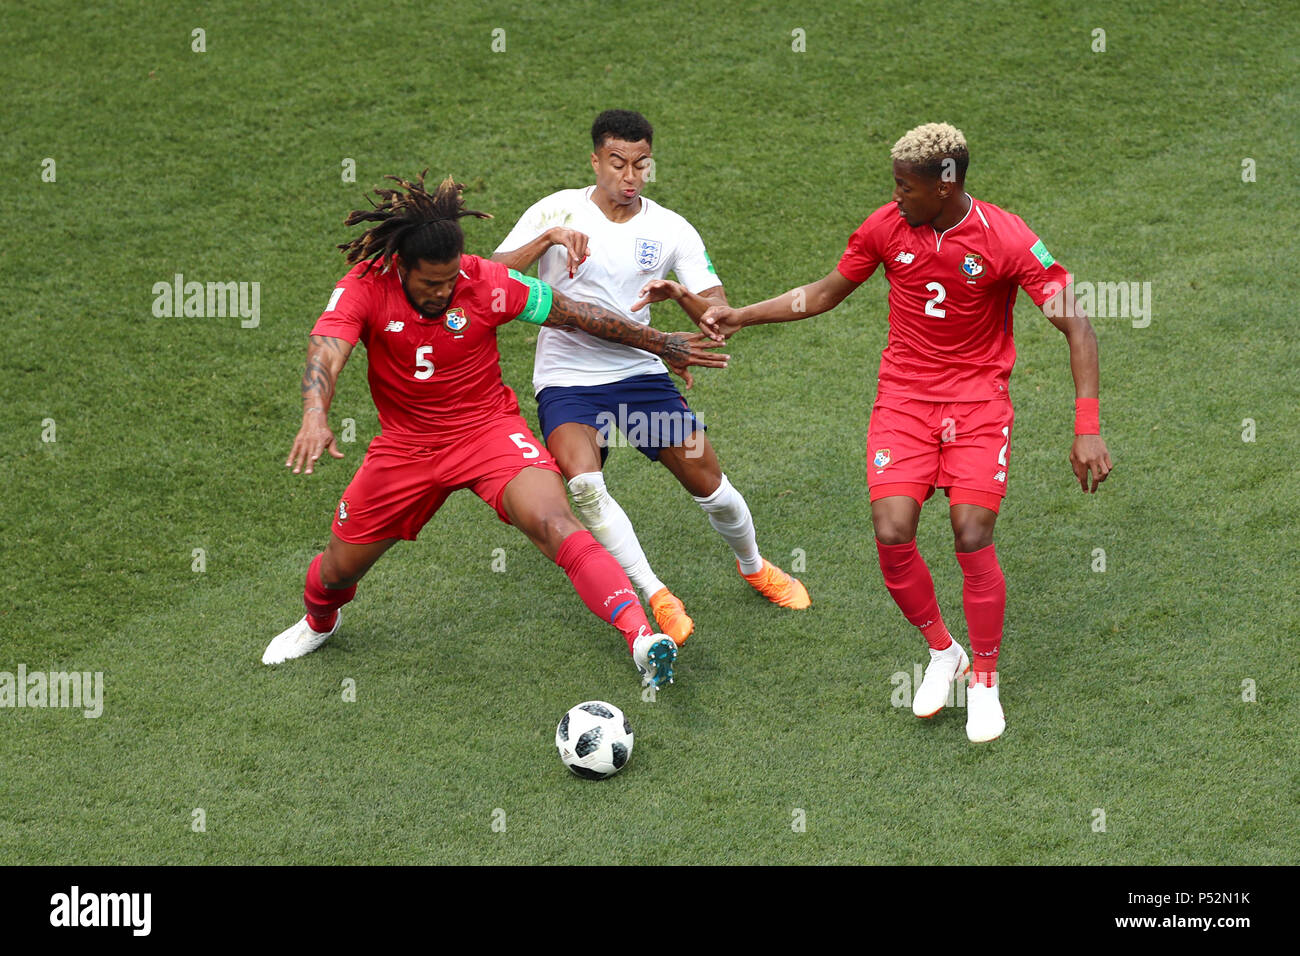 Panama's Roman Torres (left), England's Jesse Lingard and Panama's Michael Amir Murillo battle for the ball during the FIFA World Cup Group G match at the Nizhny Novgorod Stadium. Stock Photo